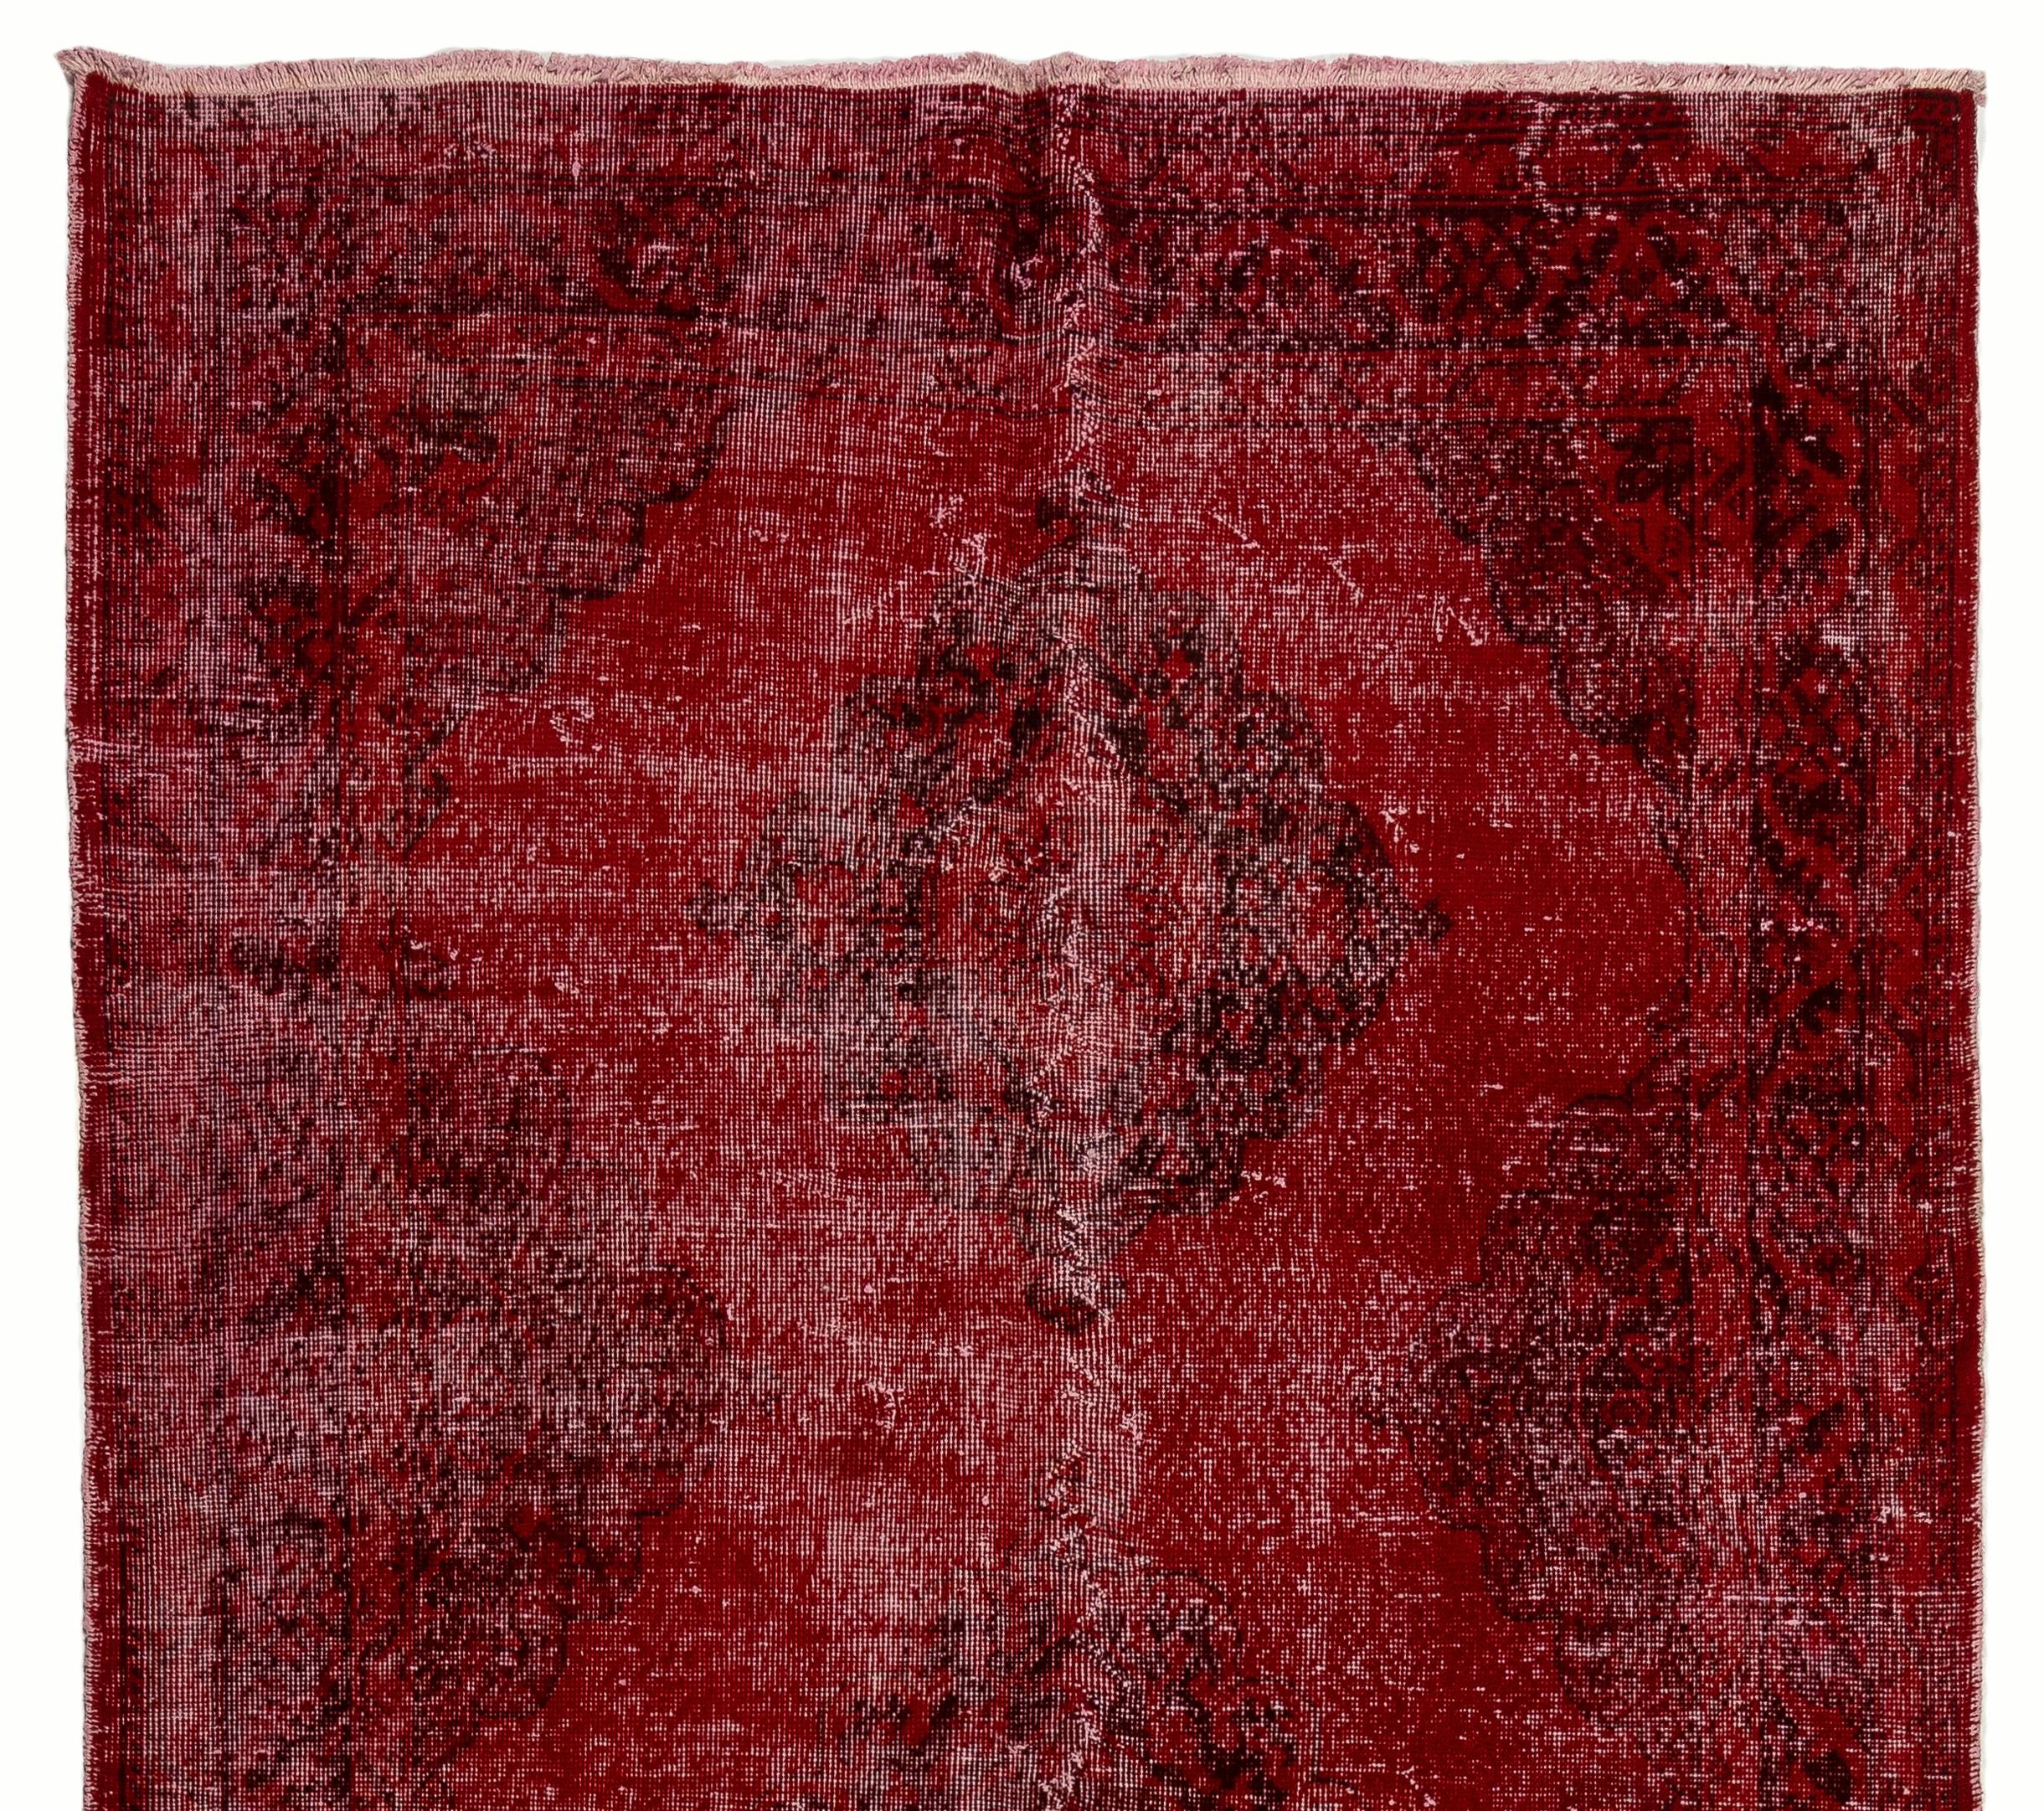 A vintage distressed Turkish runner rug re-dyed in red color, great for contemporary interiors.
Finely hand knotted, low wool pile on cotton foundation. Professionally washed.
Sturdy and can be used on a high traffic area, suitable for both